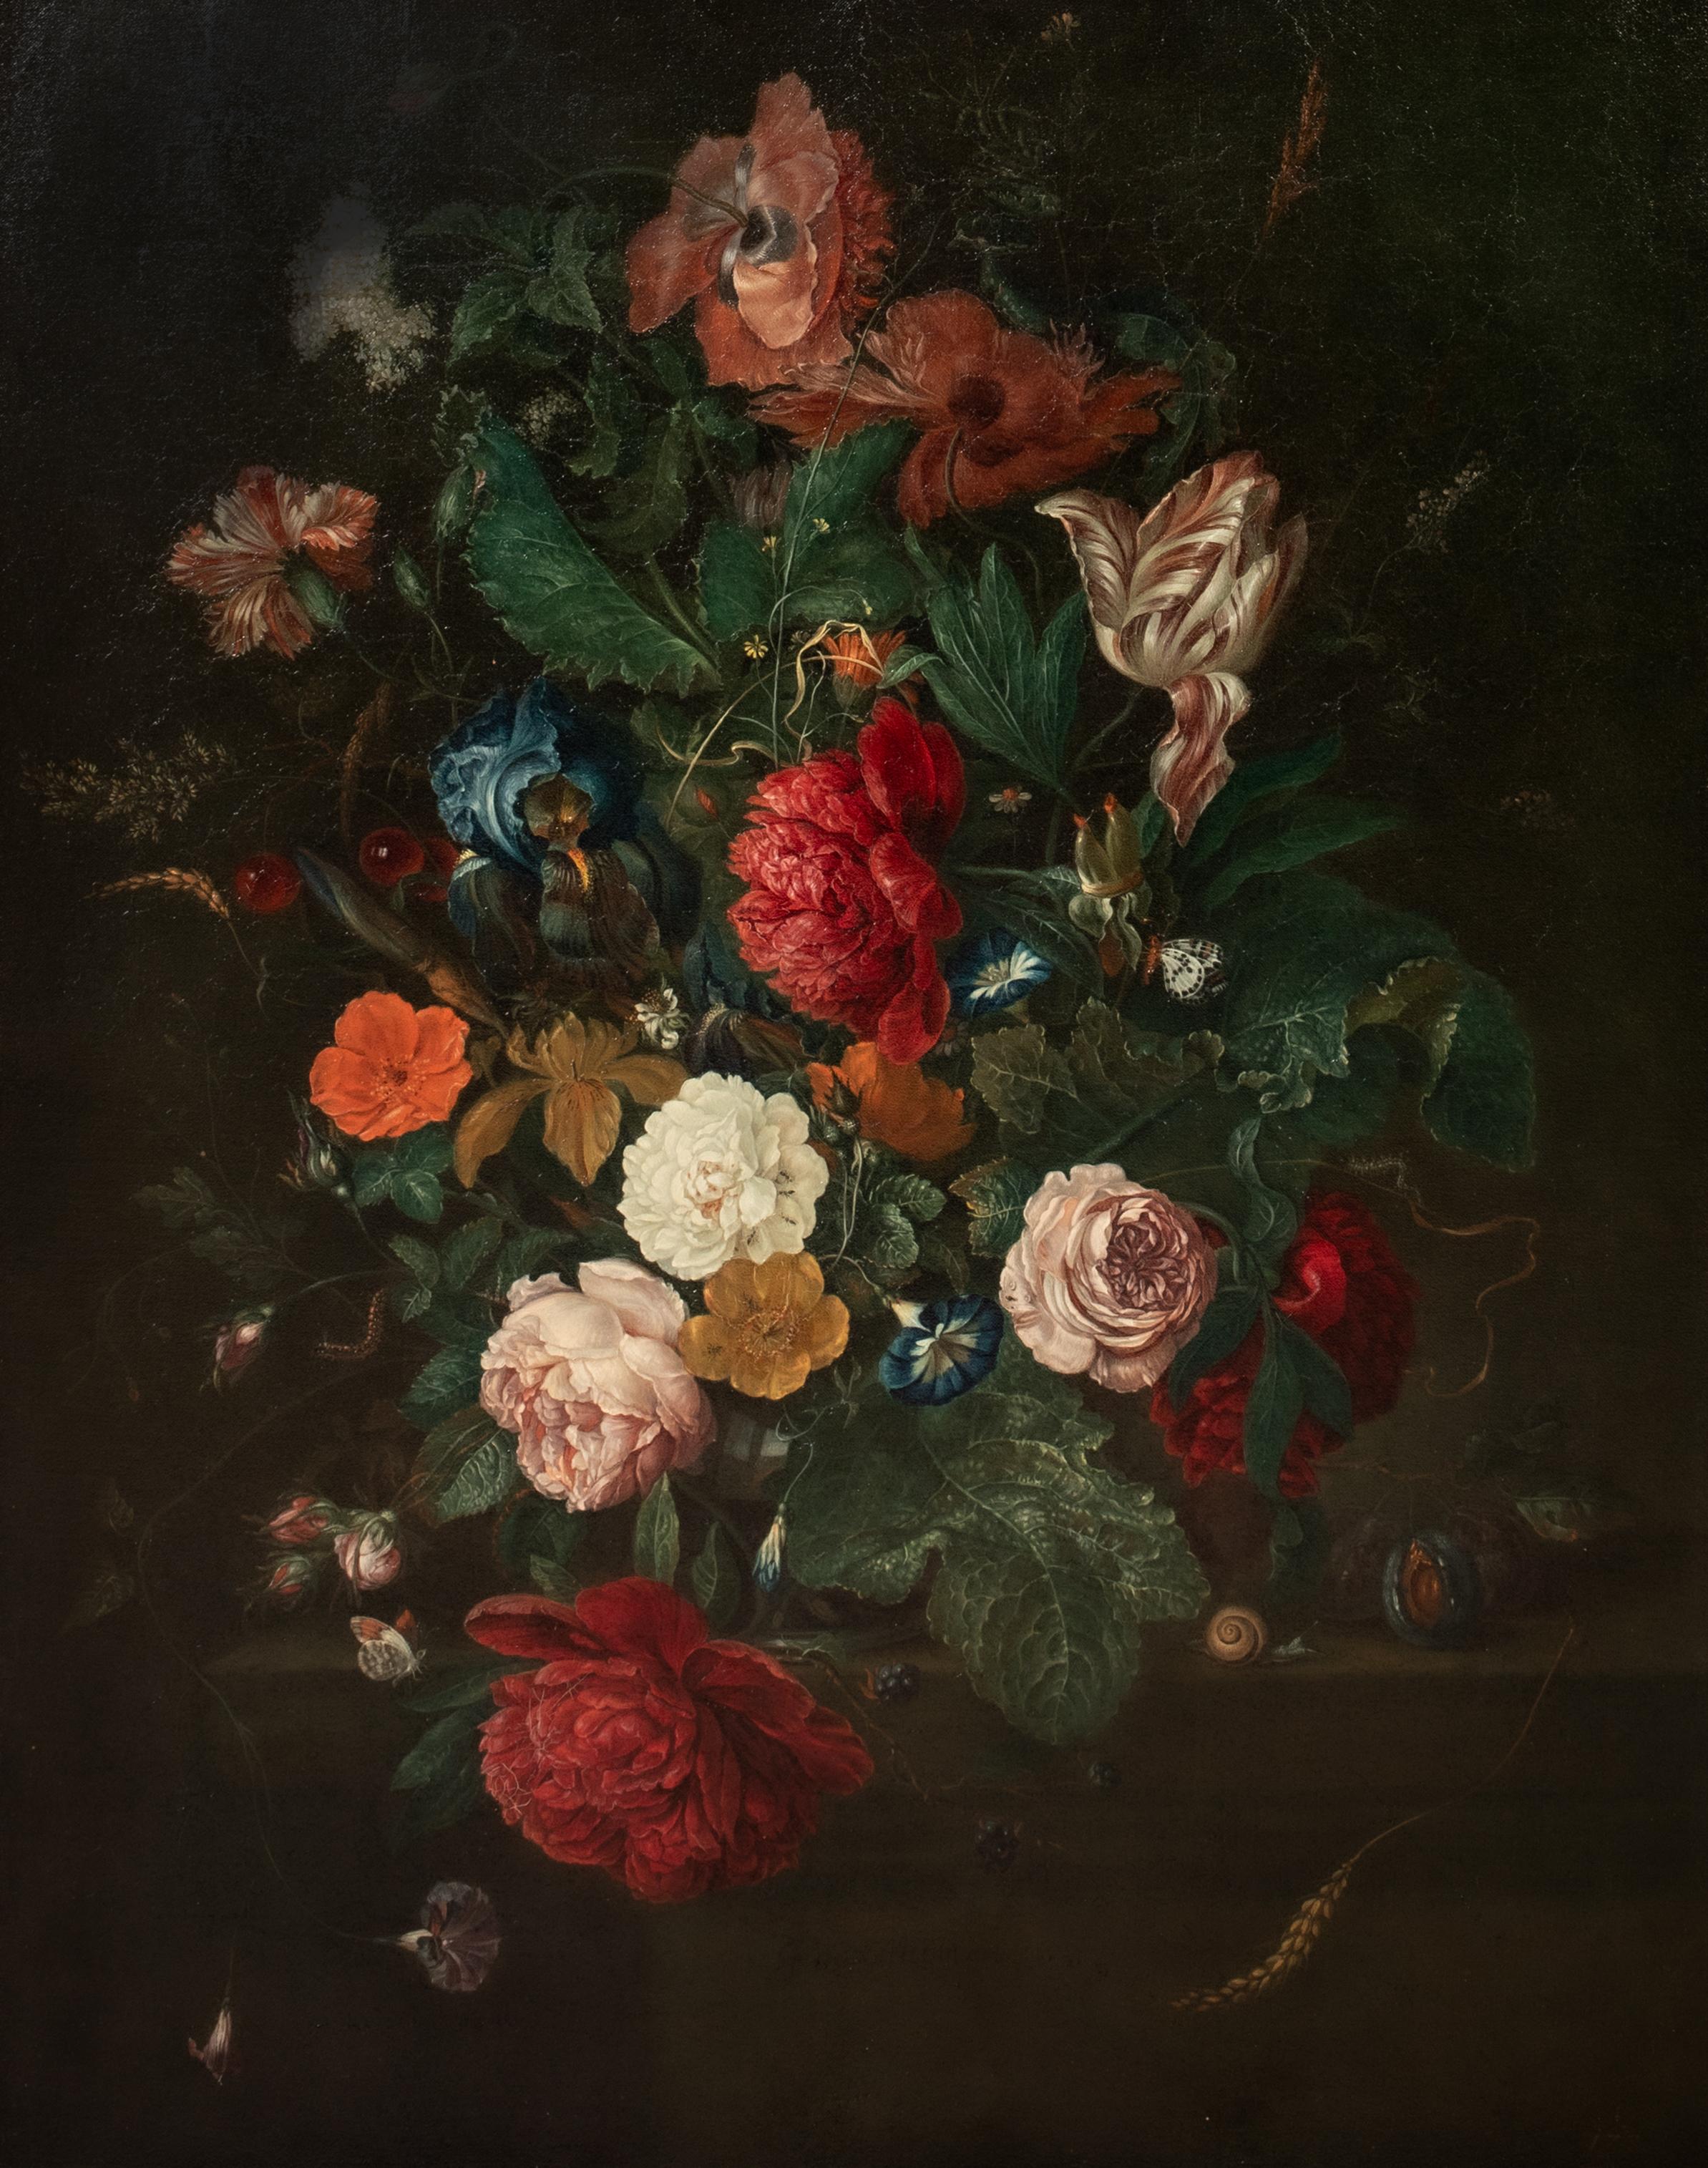 Still Life Of Flowers & Fruit In A Glass Vase Upon A Stone Mantle, 19th Century

by Jan D DE HEEM 

Large 17th century Dutch Old Master still life study of various flowers and fruit in a glass vase upon a stone mantle, oil on canvas. Excellent